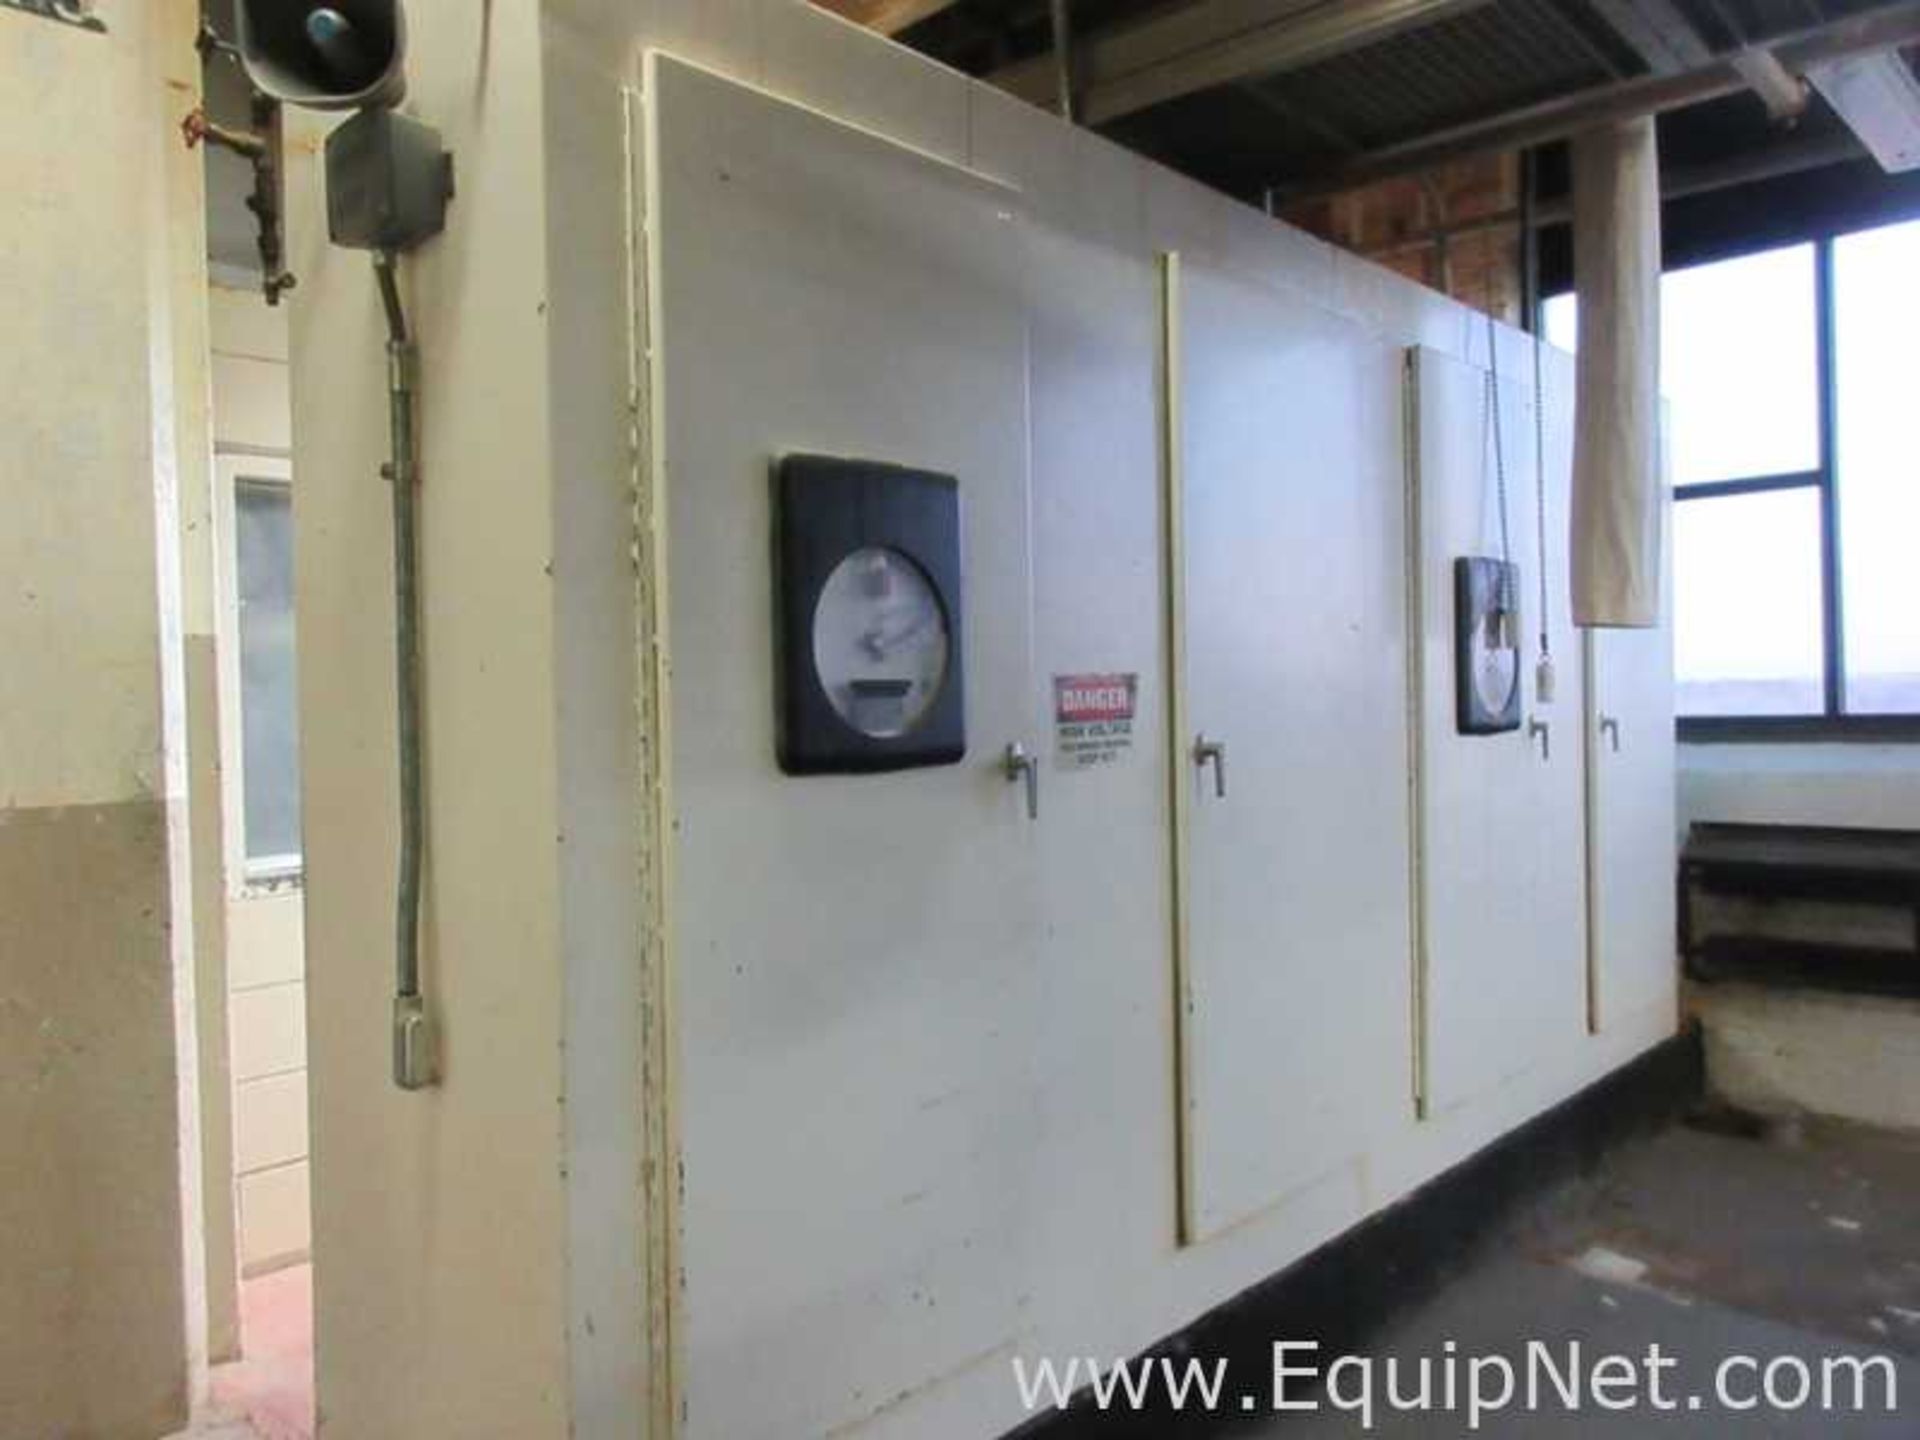 EQUIPNET LISTING #597061; REMOVAL COST: $0; DESCRIPTION: National Drying Machinery Belt - Image 26 of 27